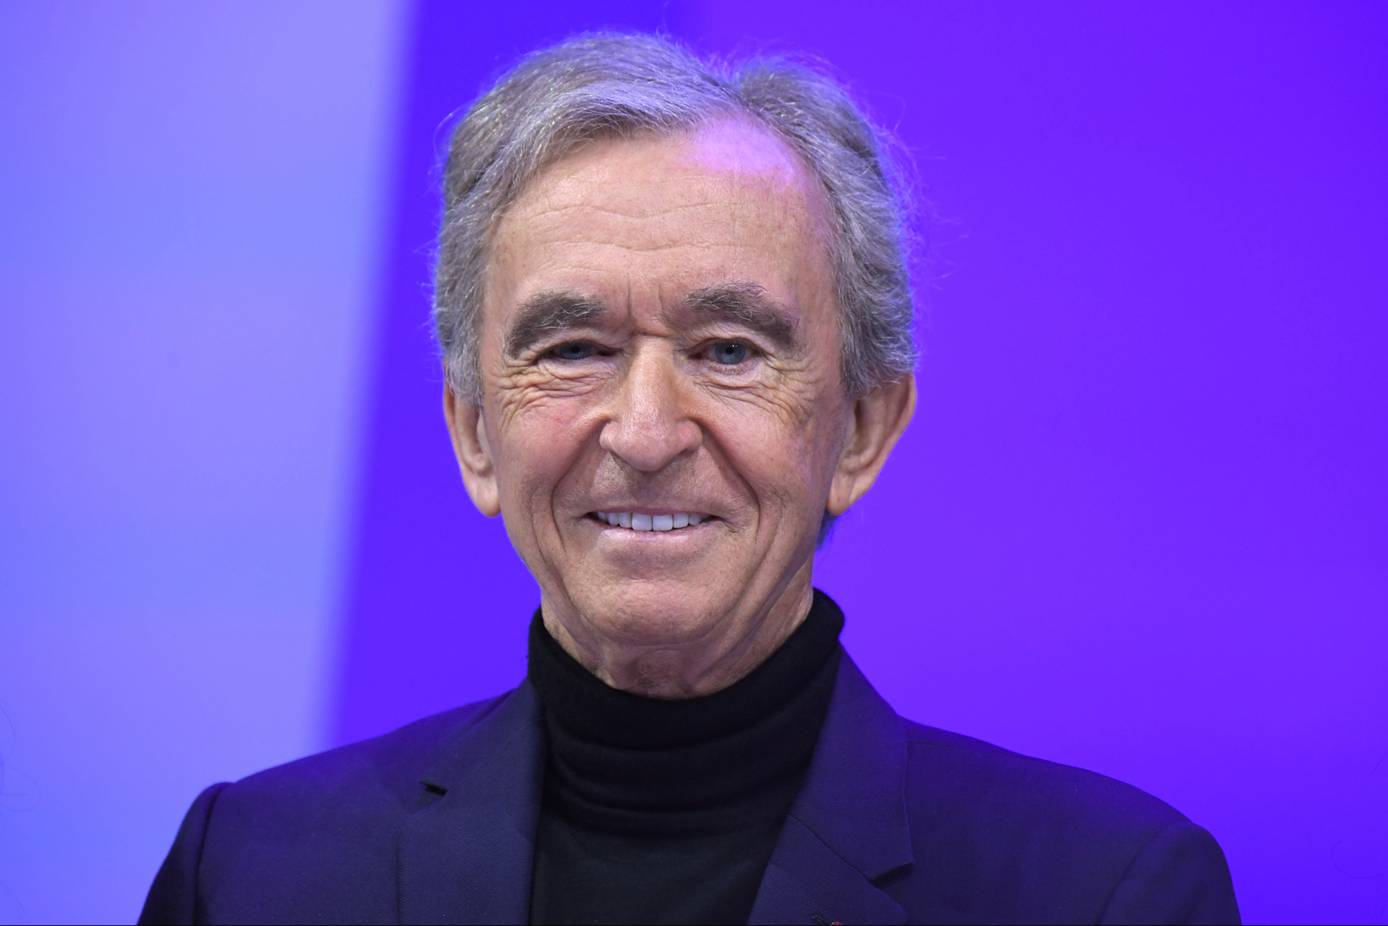 LVMH's Bernard Arnault Is Being Probed for Possible Money